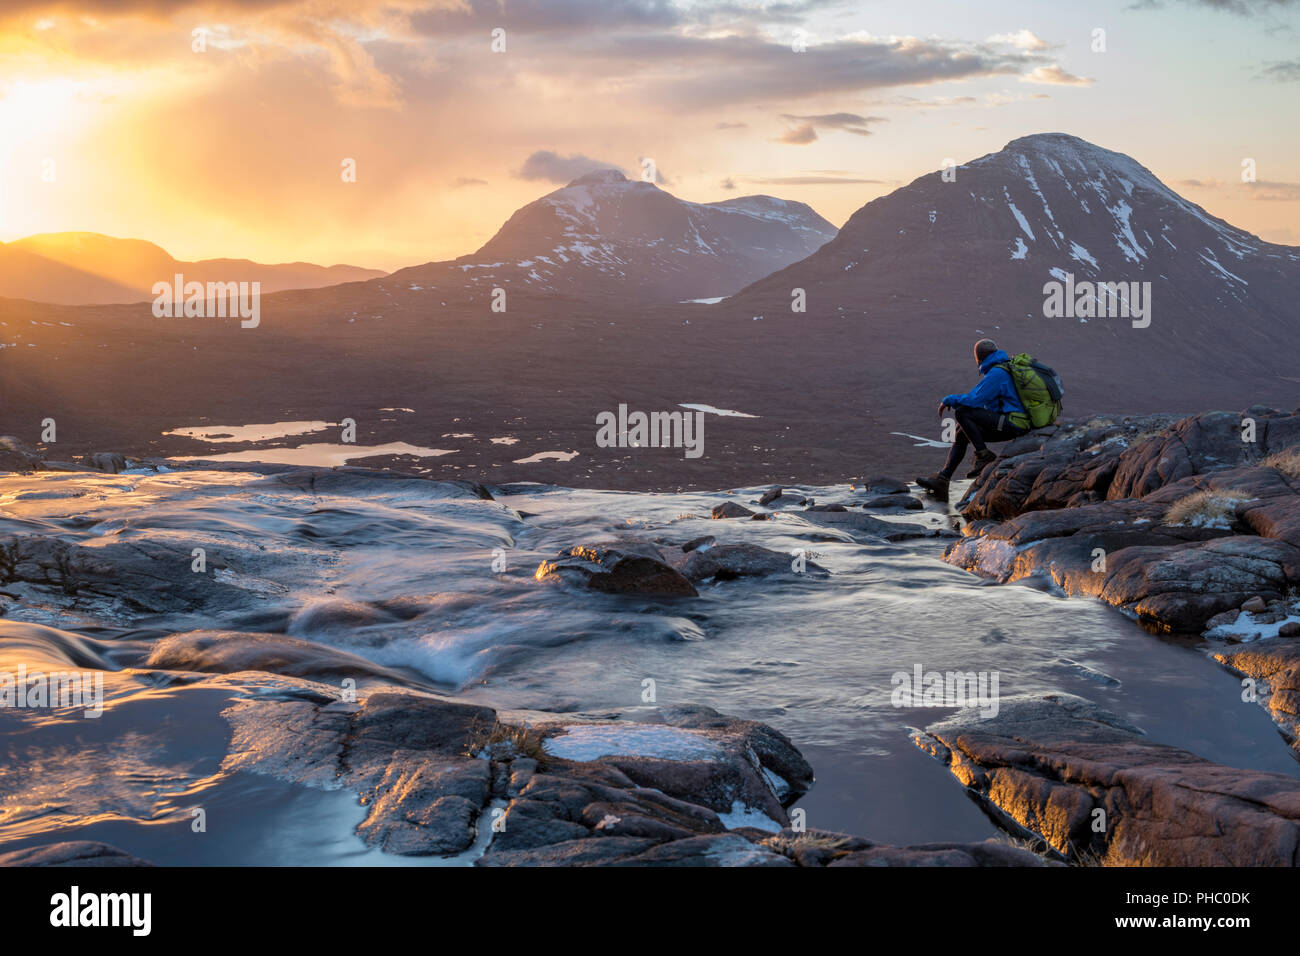 Hiking in the Scottish Highlands in Torridon along The Cape Wrath Trail near Loch Coire Mhic Fhearchair, Highlands, Scotland, United Kingdom, Europe Stock Photo